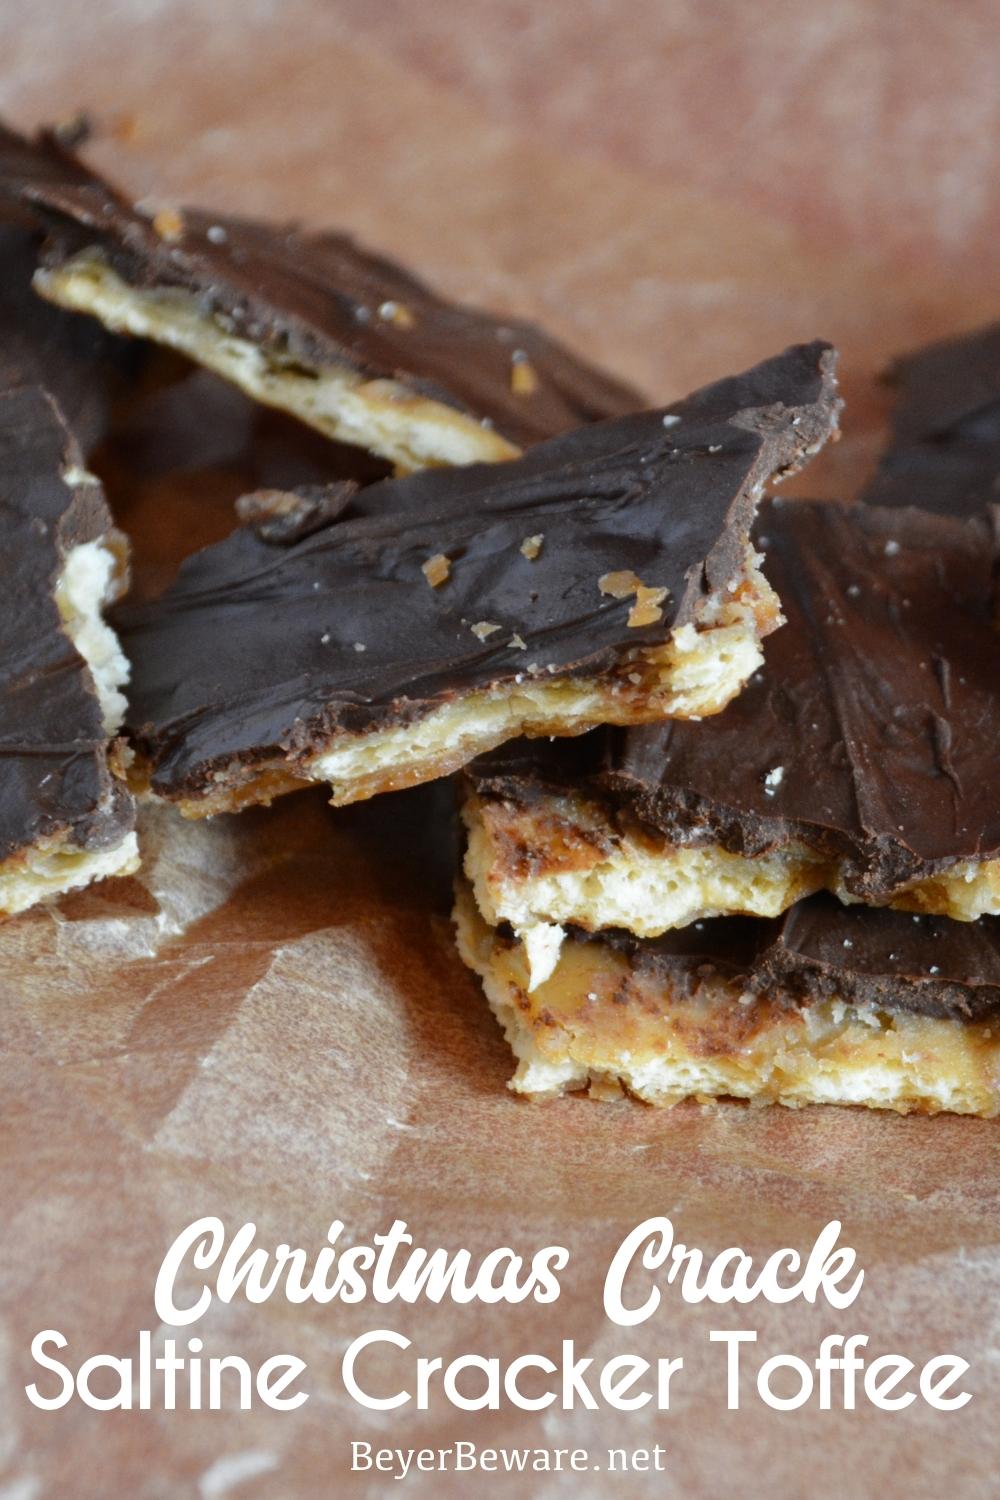 Saltine cracker toffee is a four-ingredient candy recipe that is easy to make with saltine crackers, butter, brown sugar, and chocolate chips and baked quickly before being broken into toffee pieces.